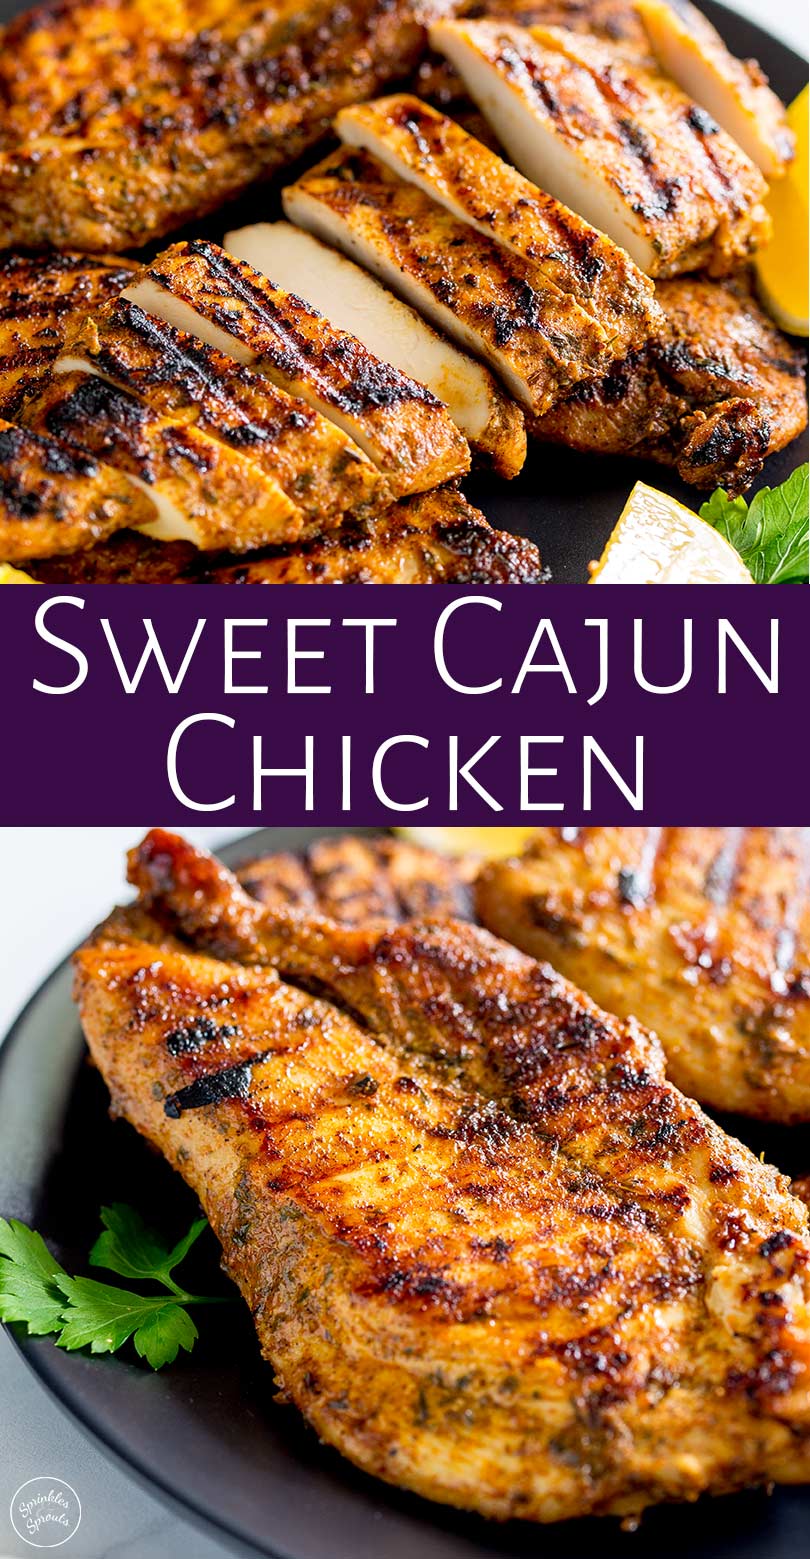 two pictures of cajun chicken with text in a purple box